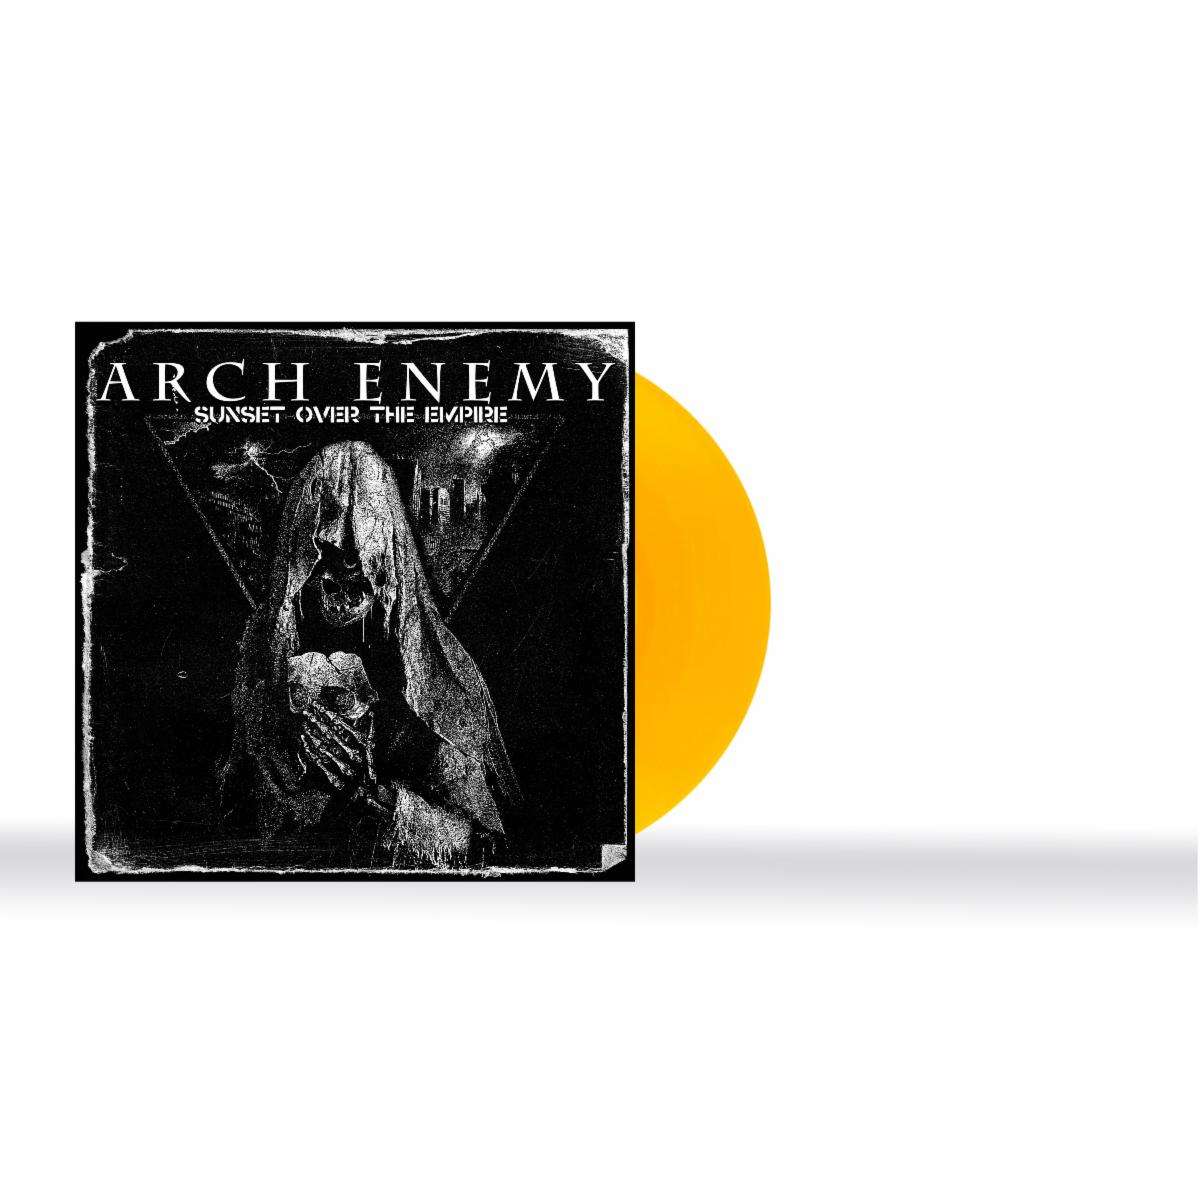 Arch Enemy launches Sunset Over The Empire pre-order 2